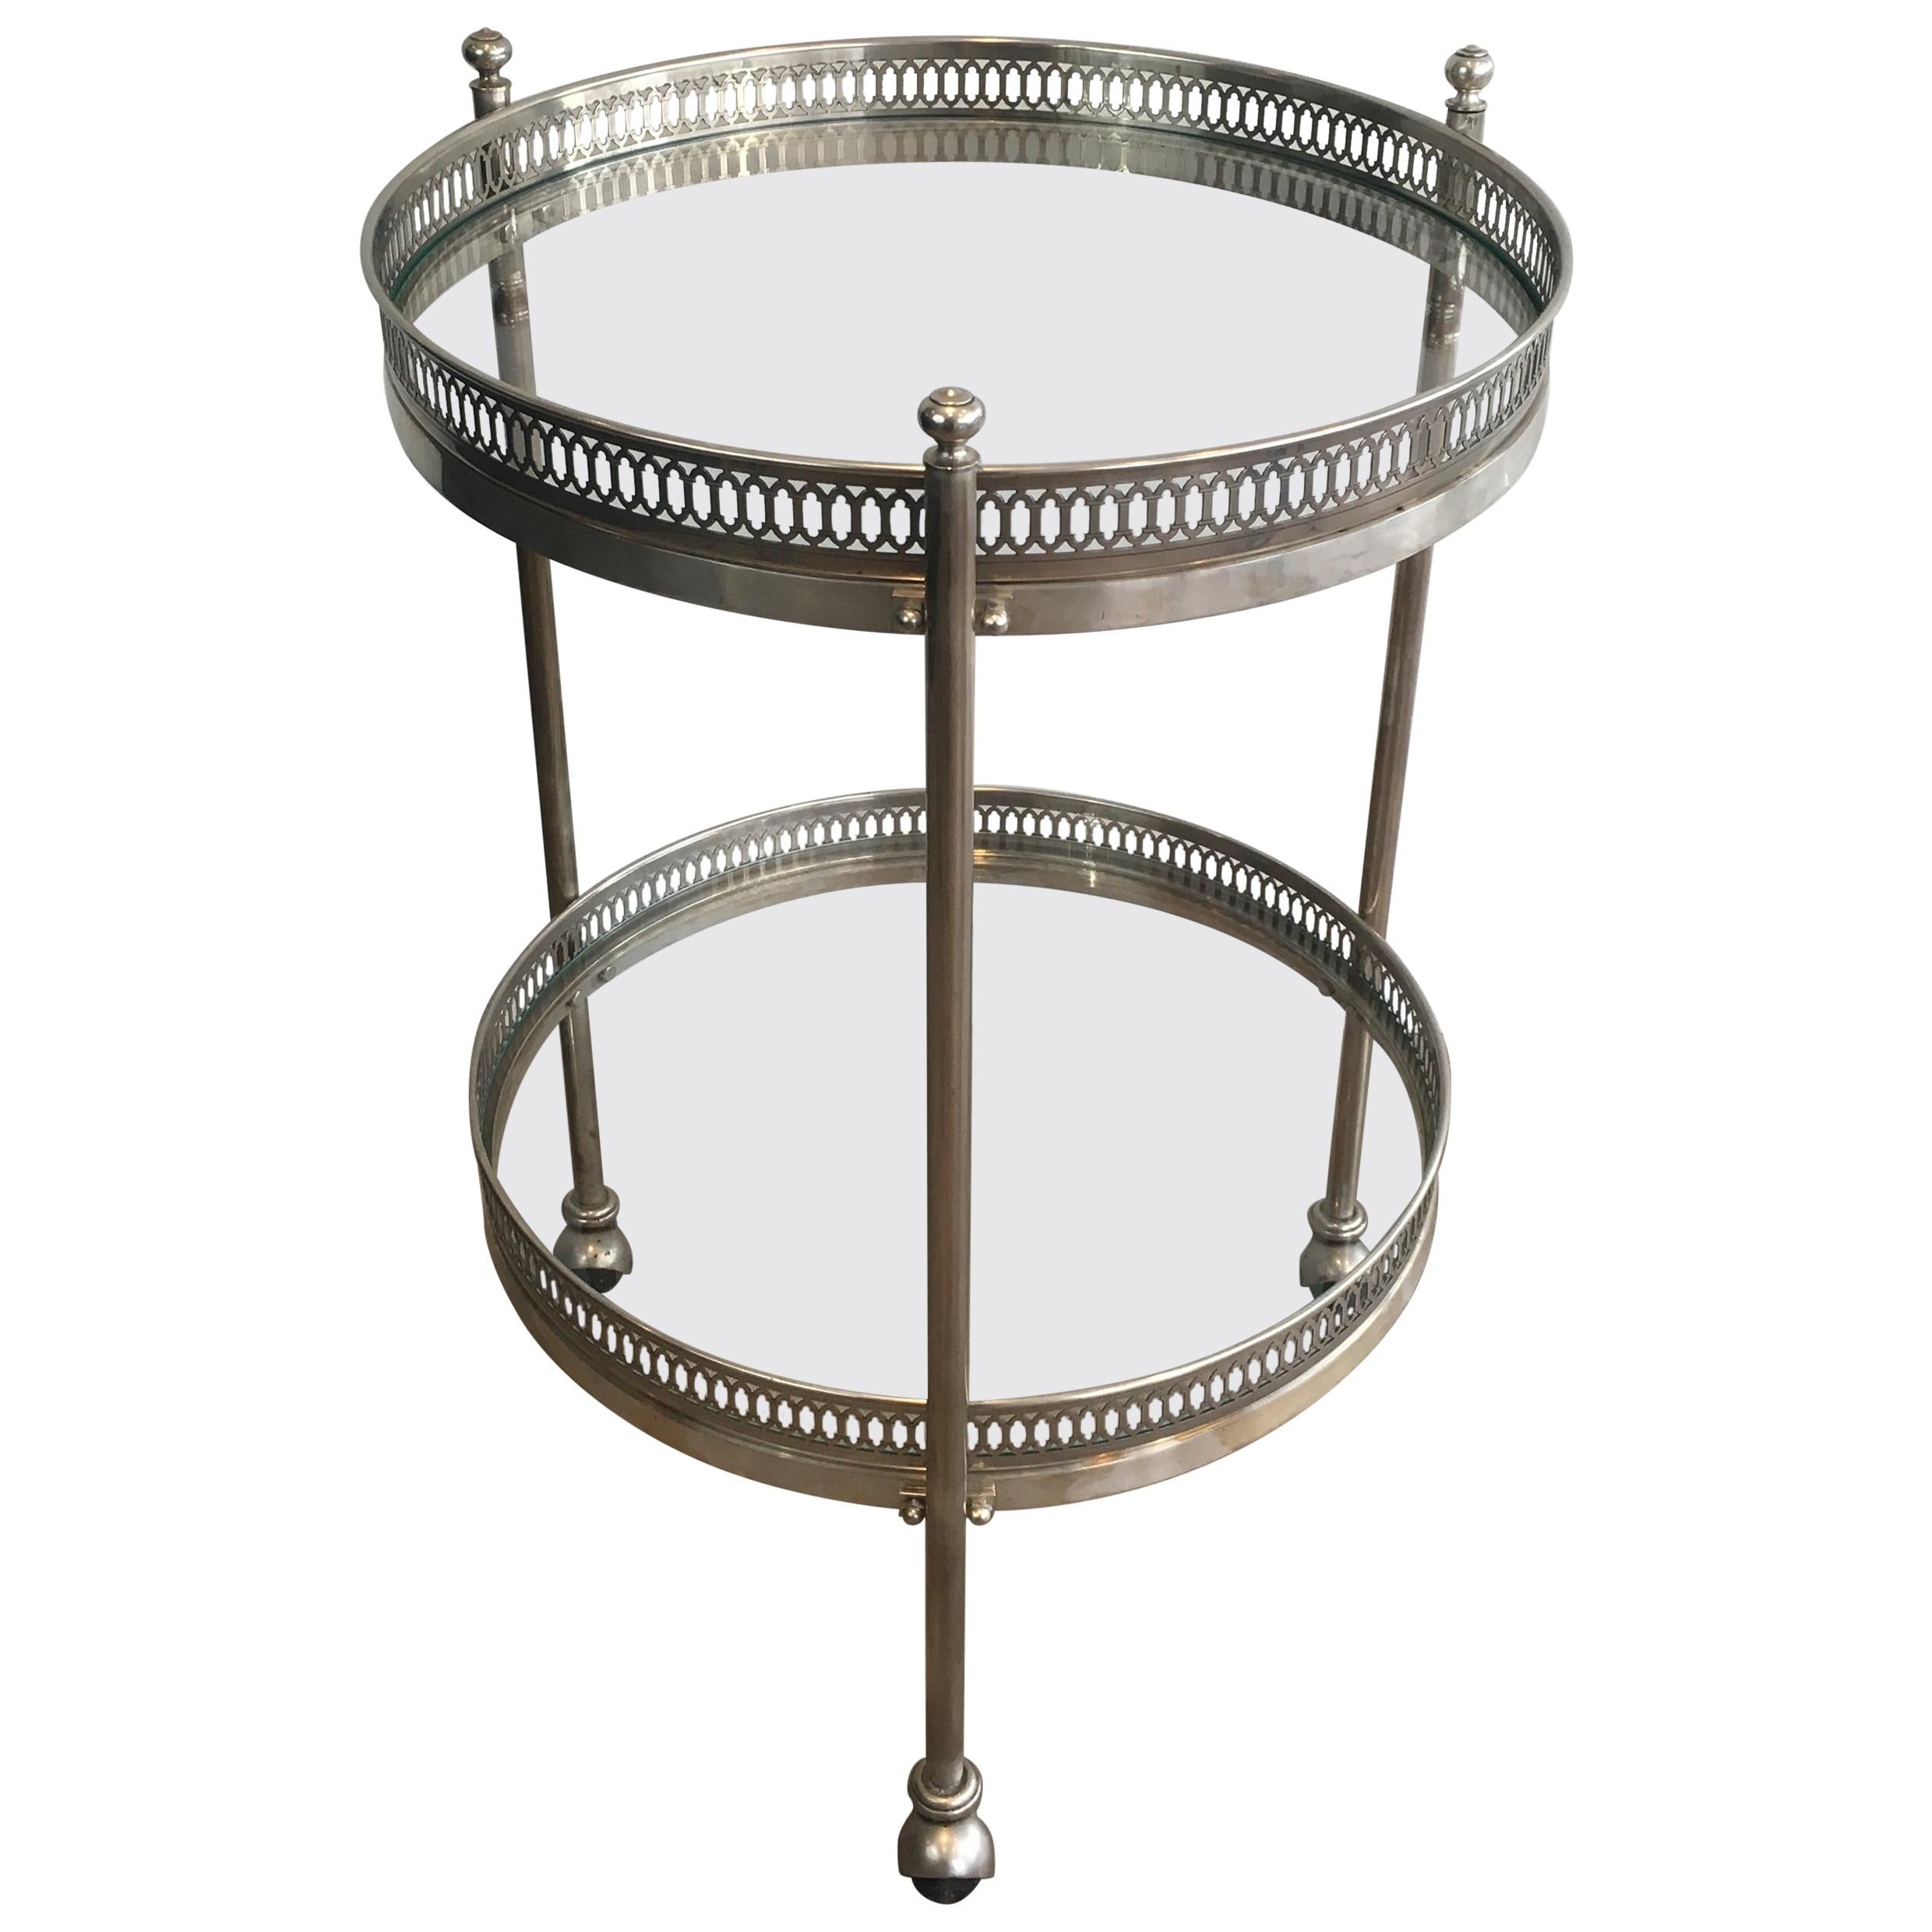 Neoclassical Silver Plated Round Trolley, French, circa 1940